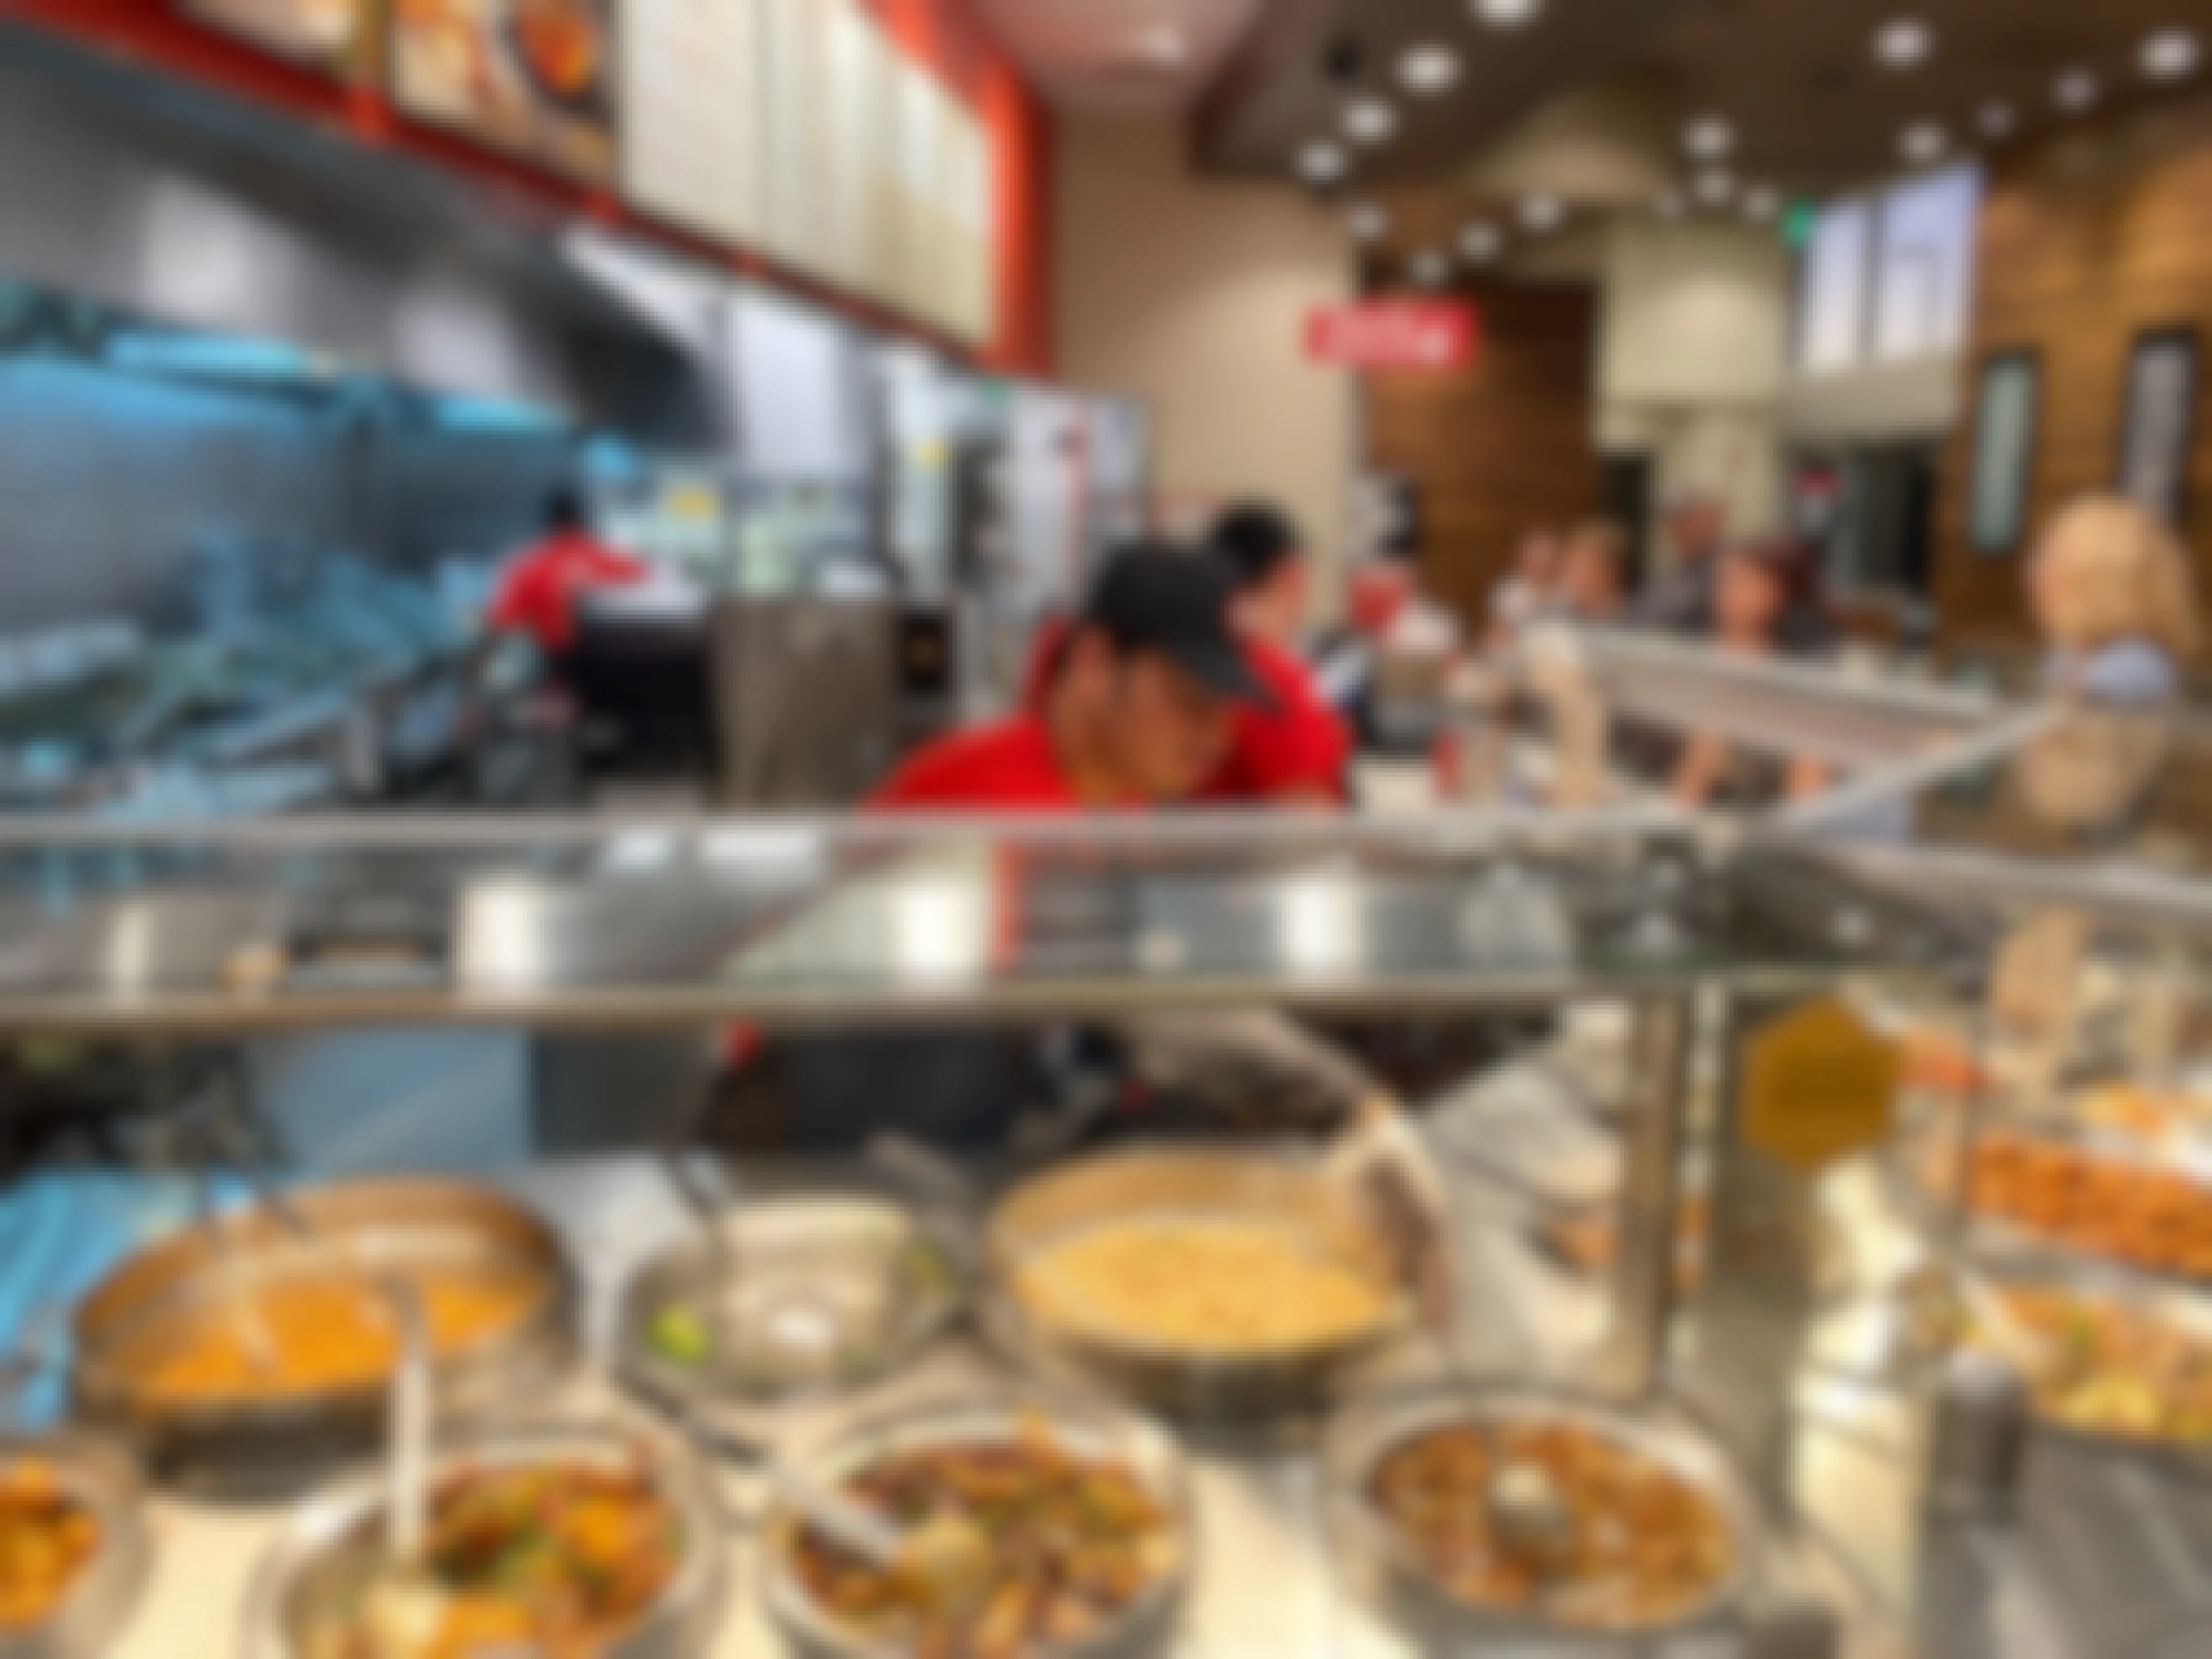 A Panda Express restaurant with employees serving customers